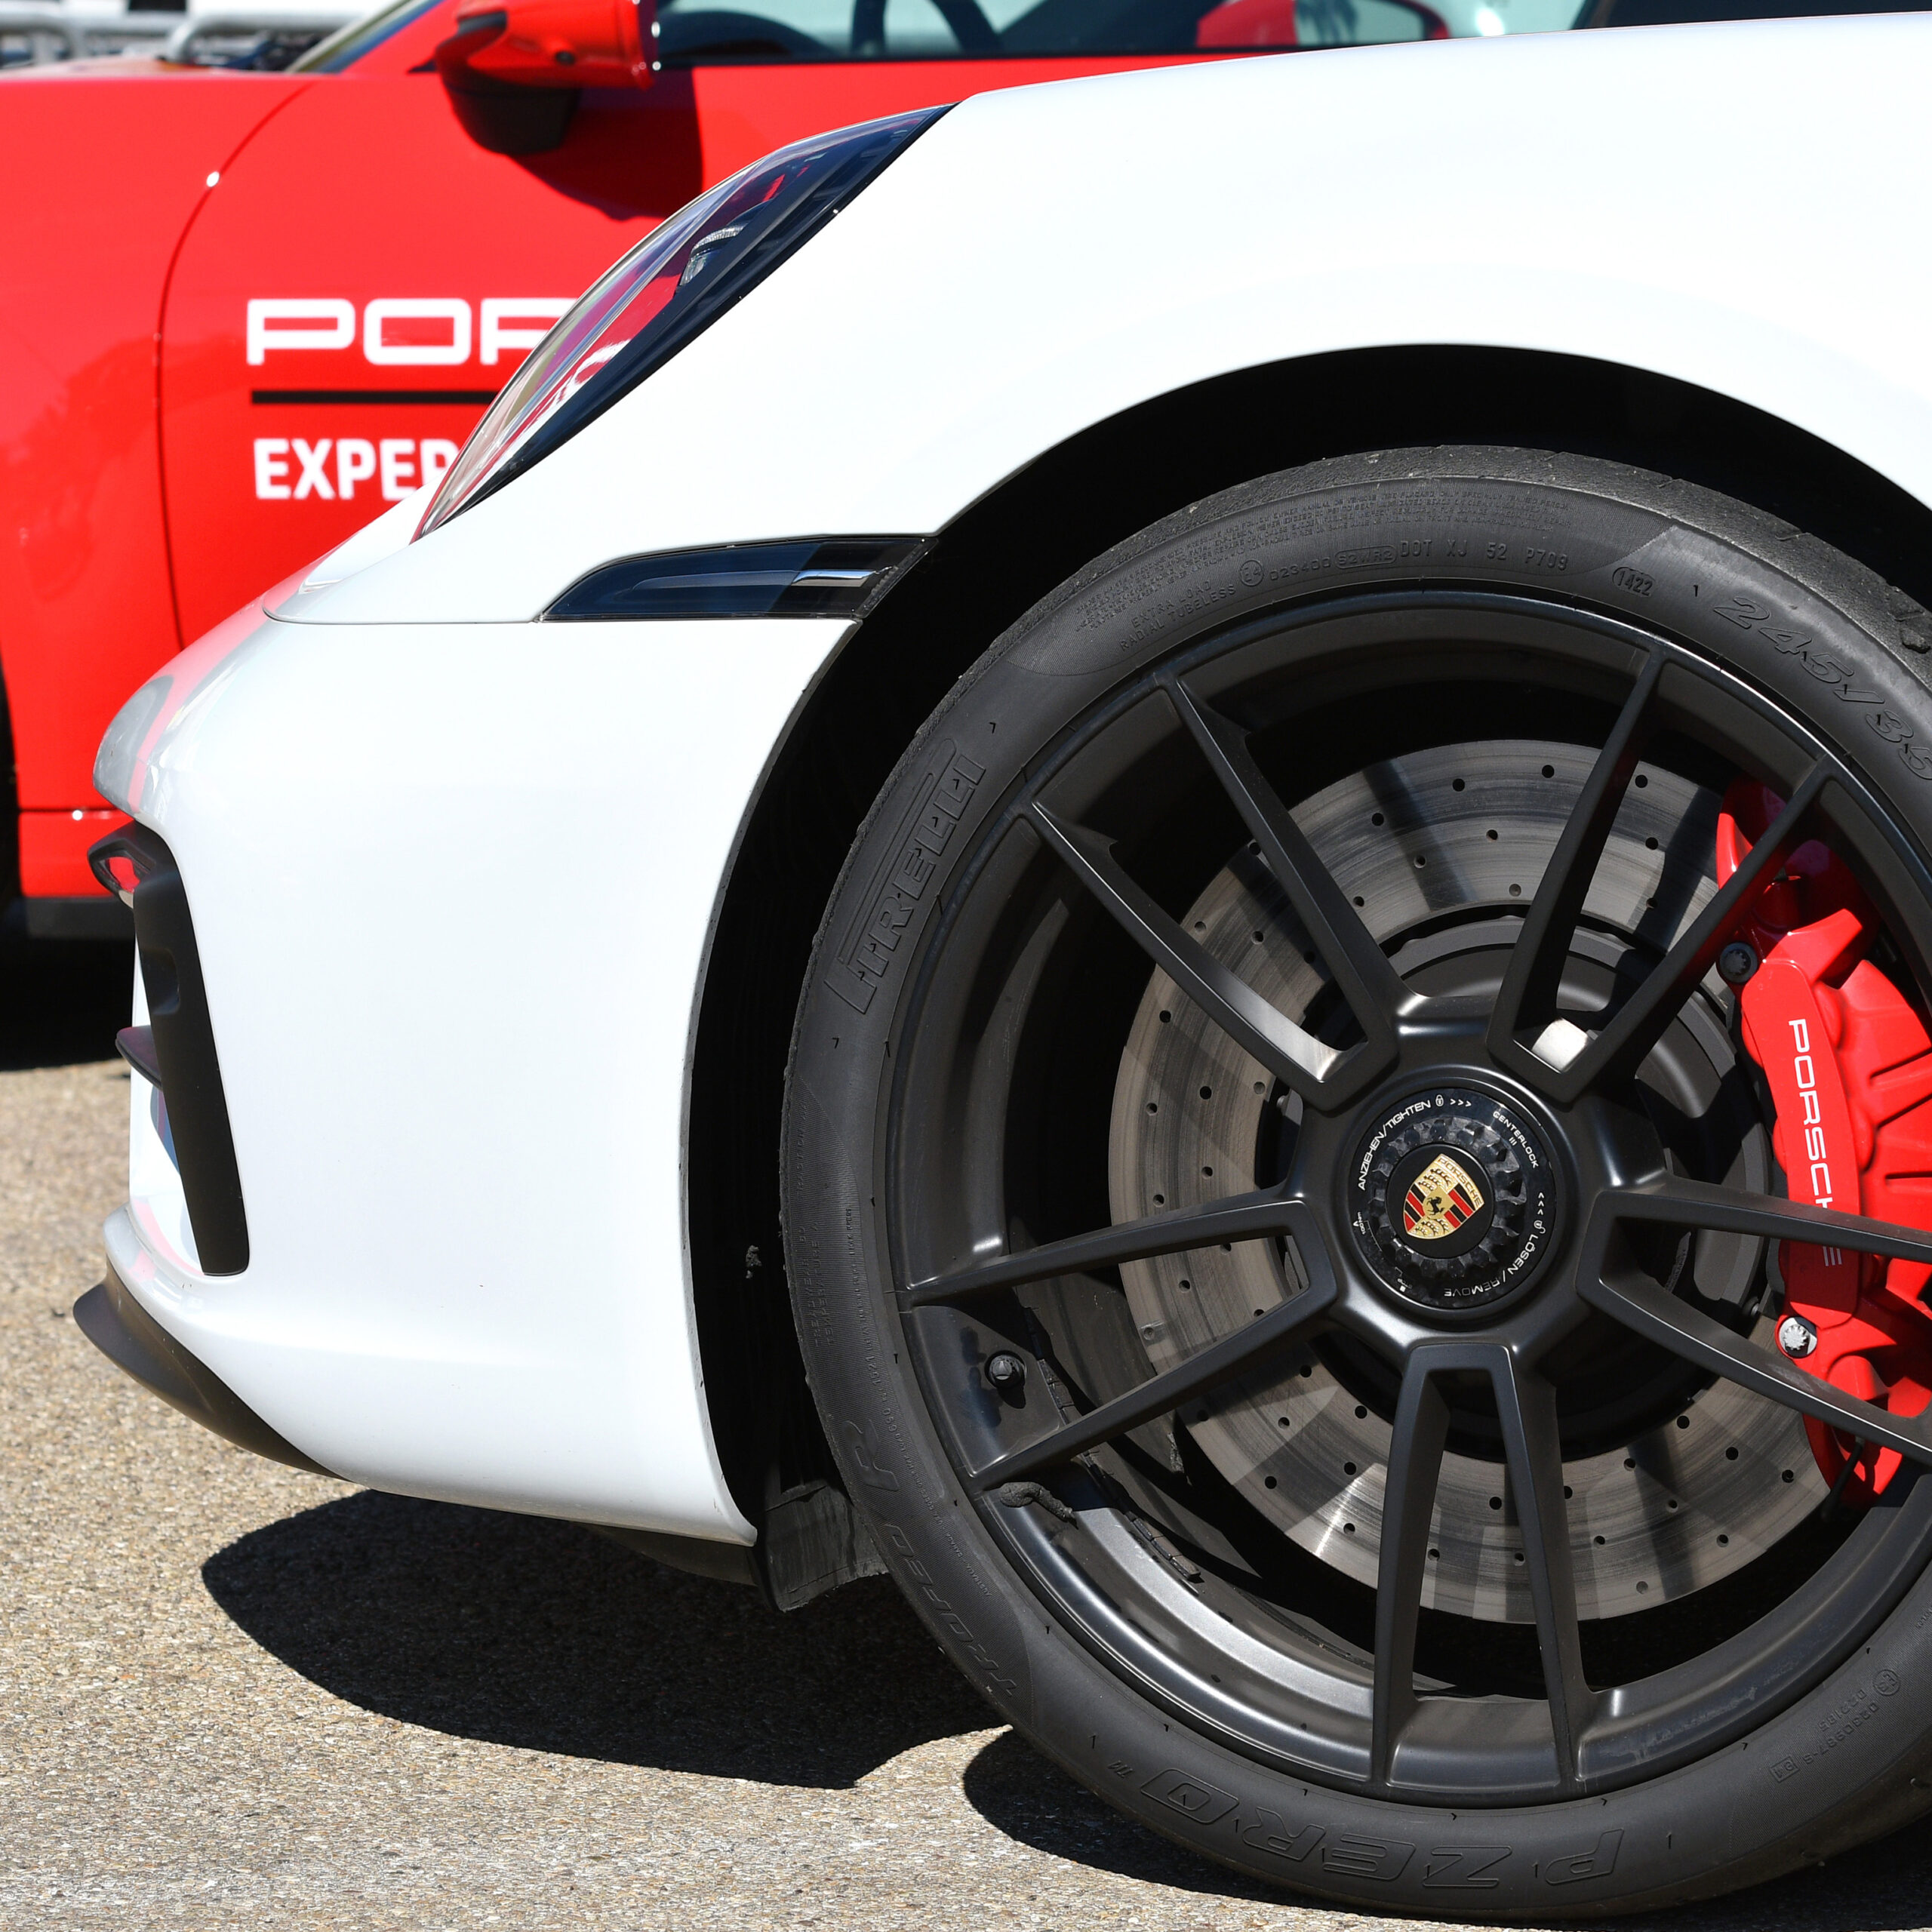 Mugello Circuit, Italy 23 September 2022: Detail of alloy wheel with red caliper of a Porsche 911 GT3 on display in the Paddock of Mugello circuit during Porsche Sports Cup Suisse event 2022. Italy.